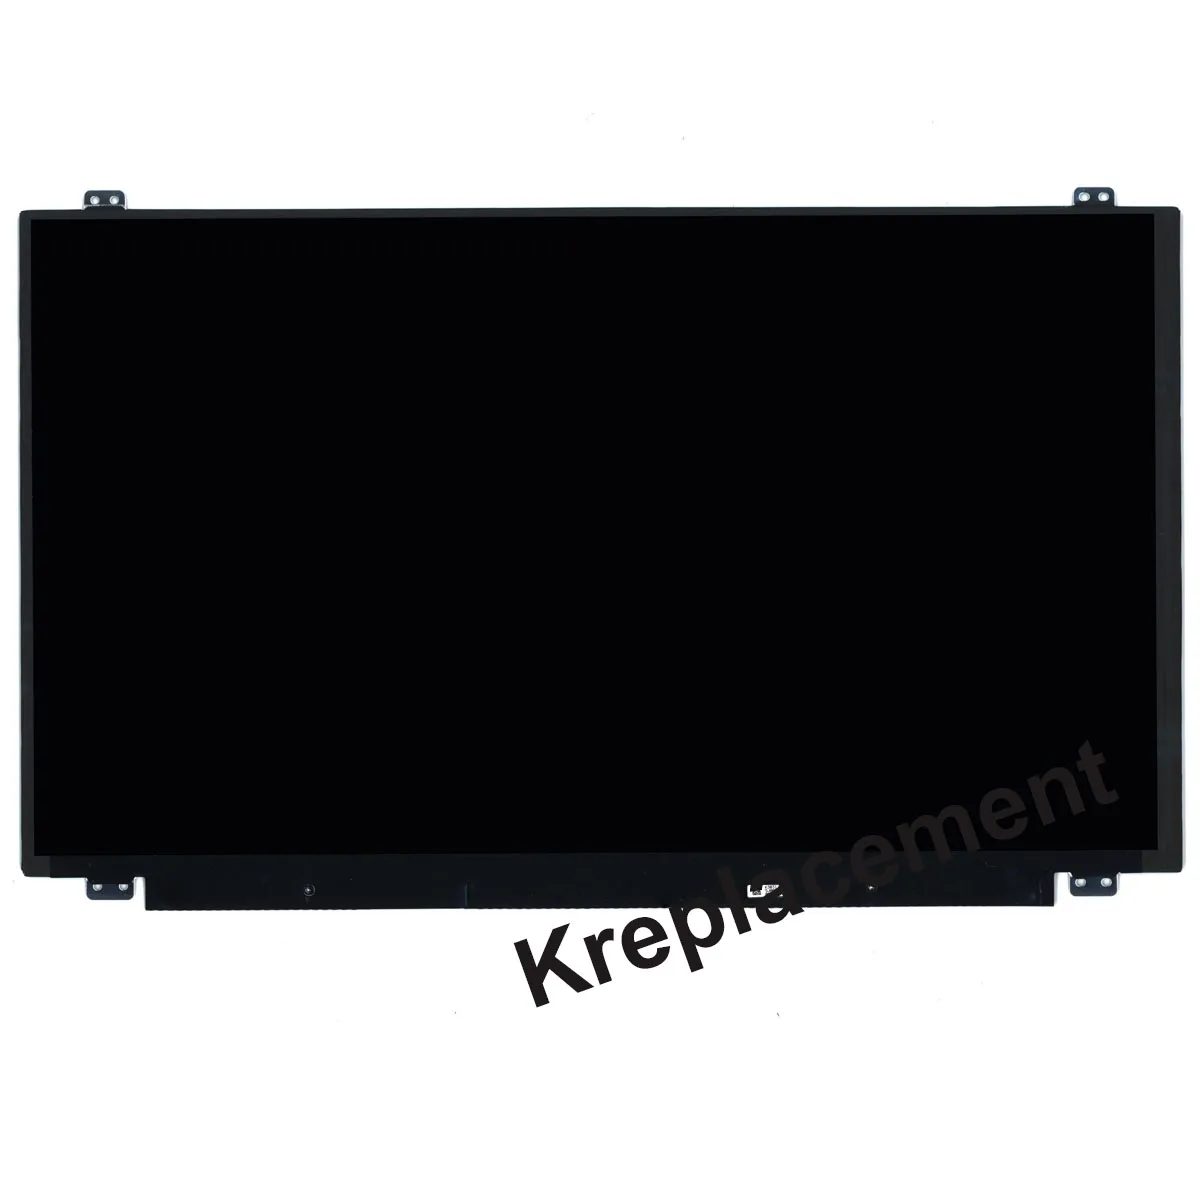 15 6 fhd lcd display screen panel rreplacement for lenovo y50 70 desktop 80ej 59418235 non touch version free global shipping